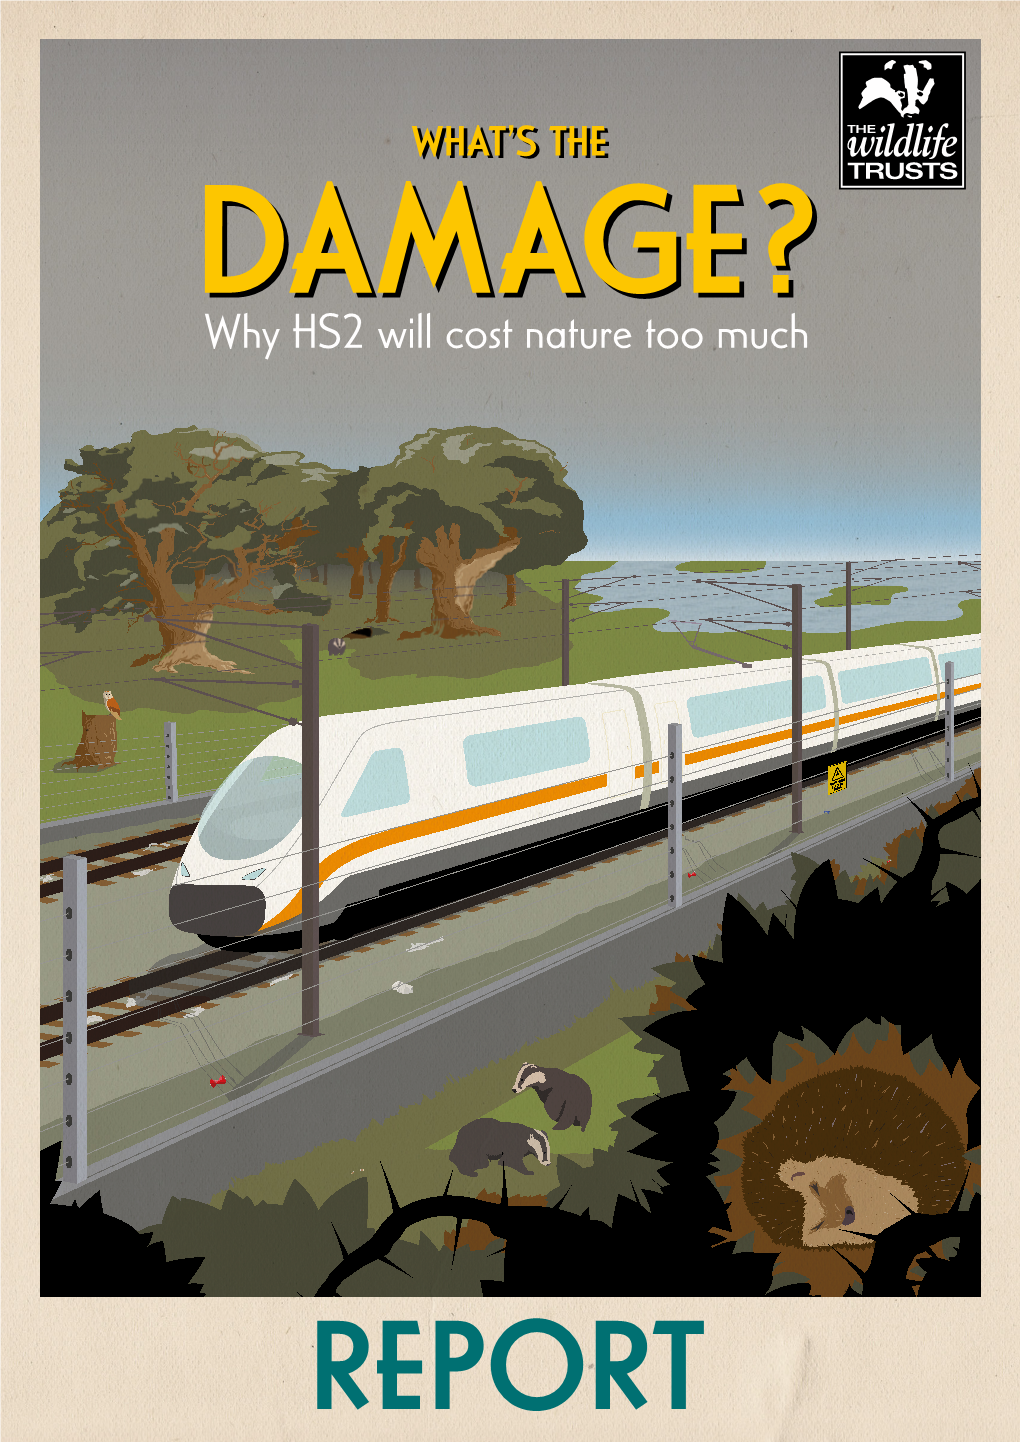 What's the Damage? Why HS2 Will Cost Nature Too Much